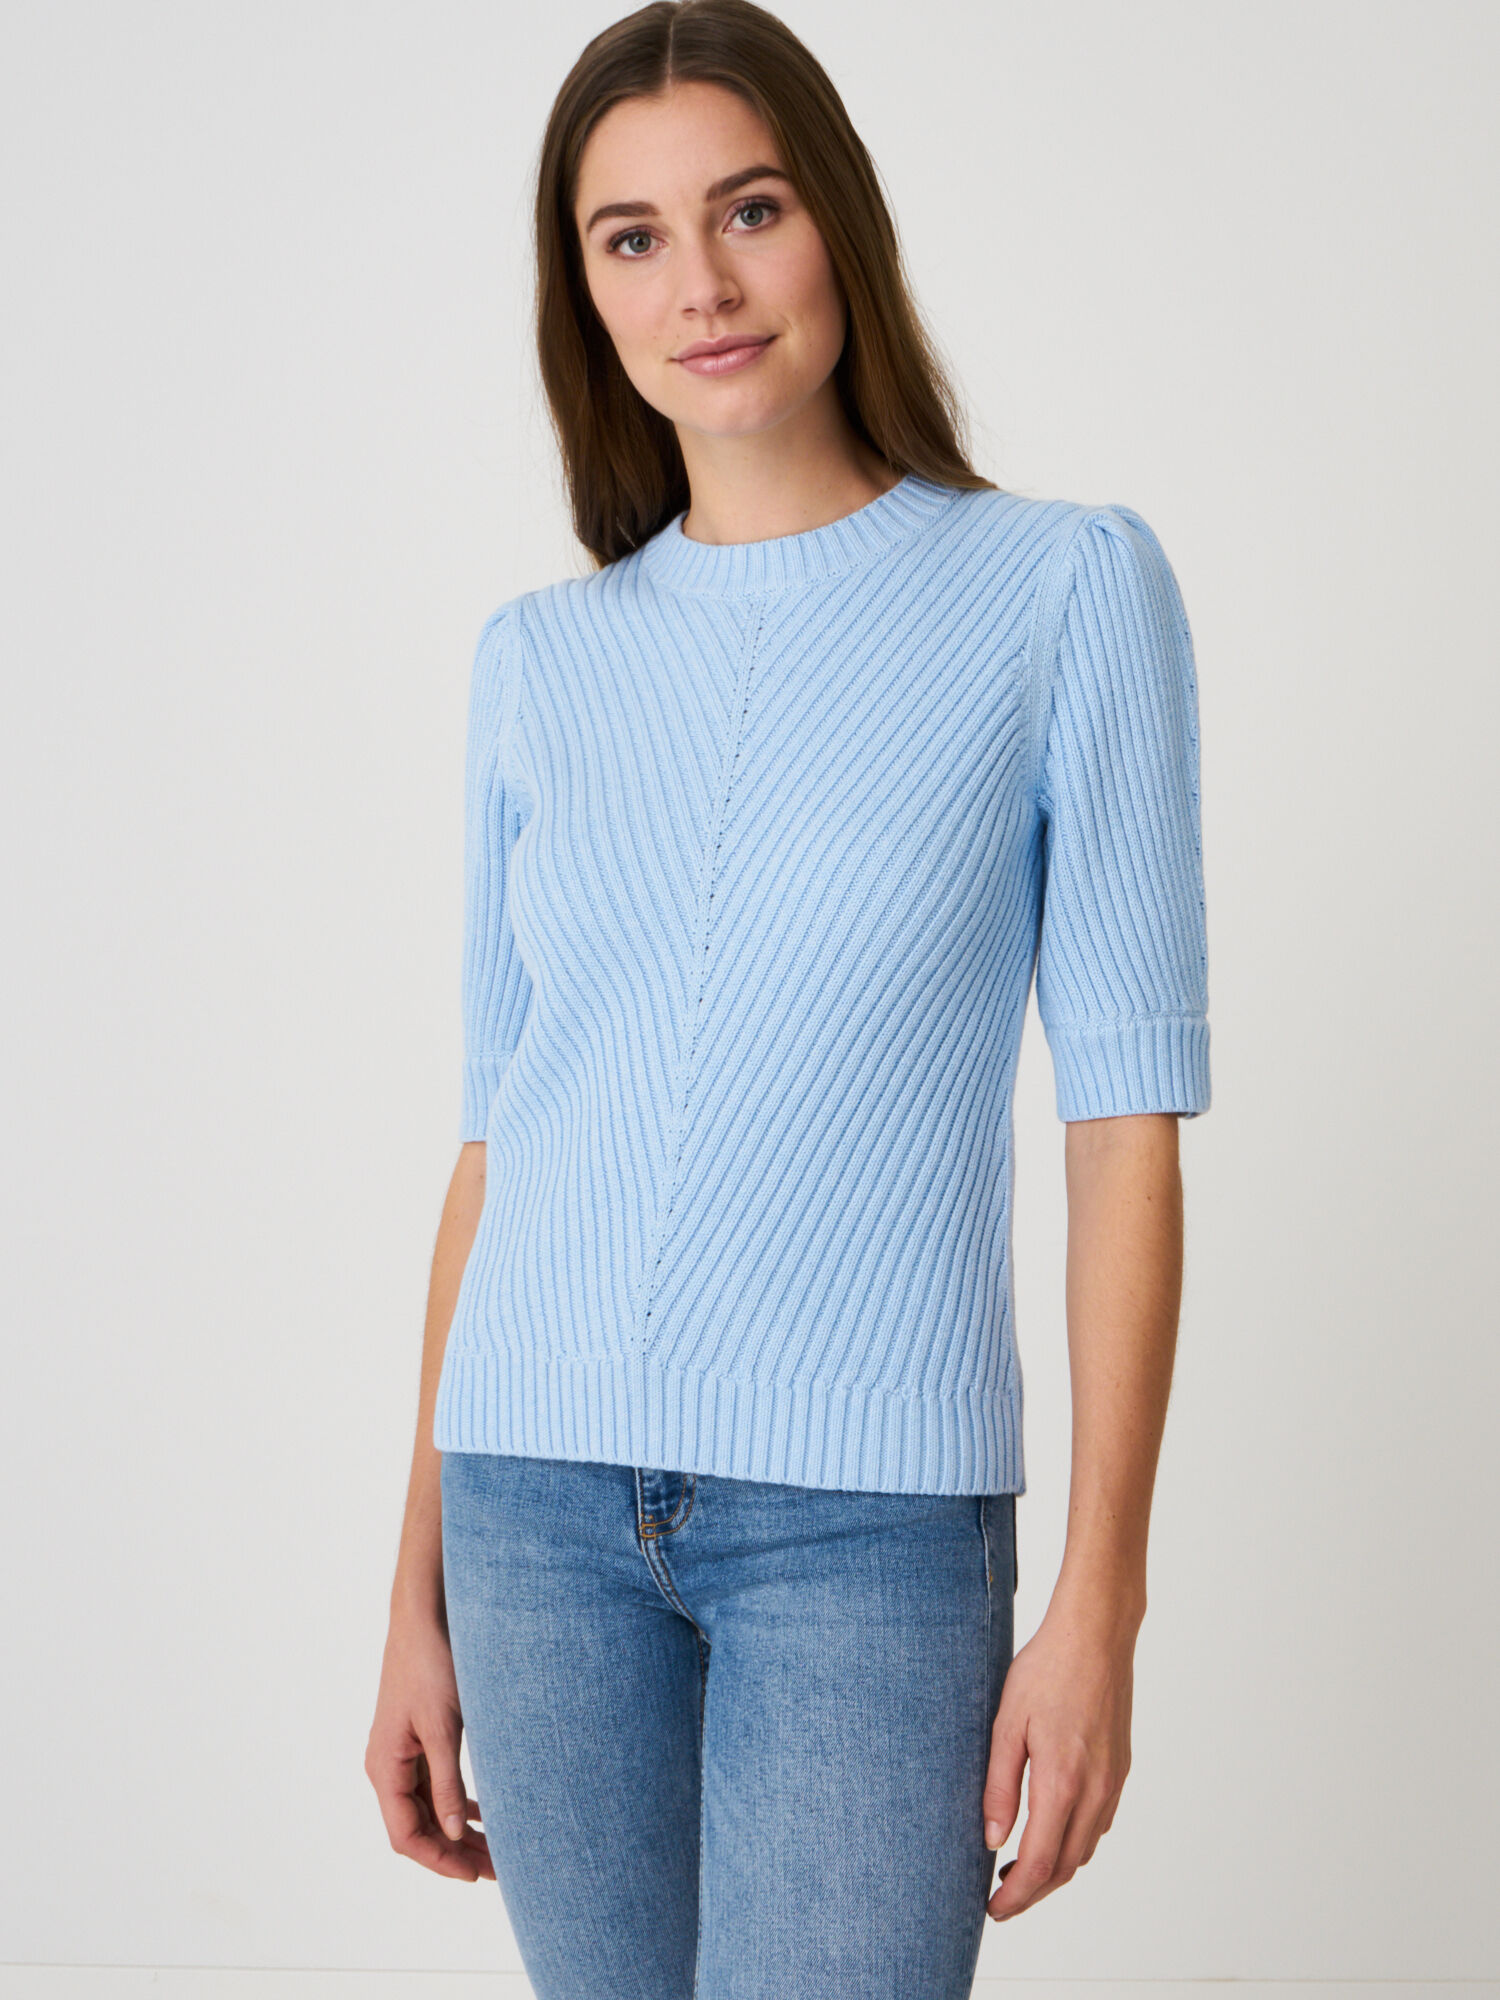 Short puff sleeve sweater with diagonal fancy rib knit